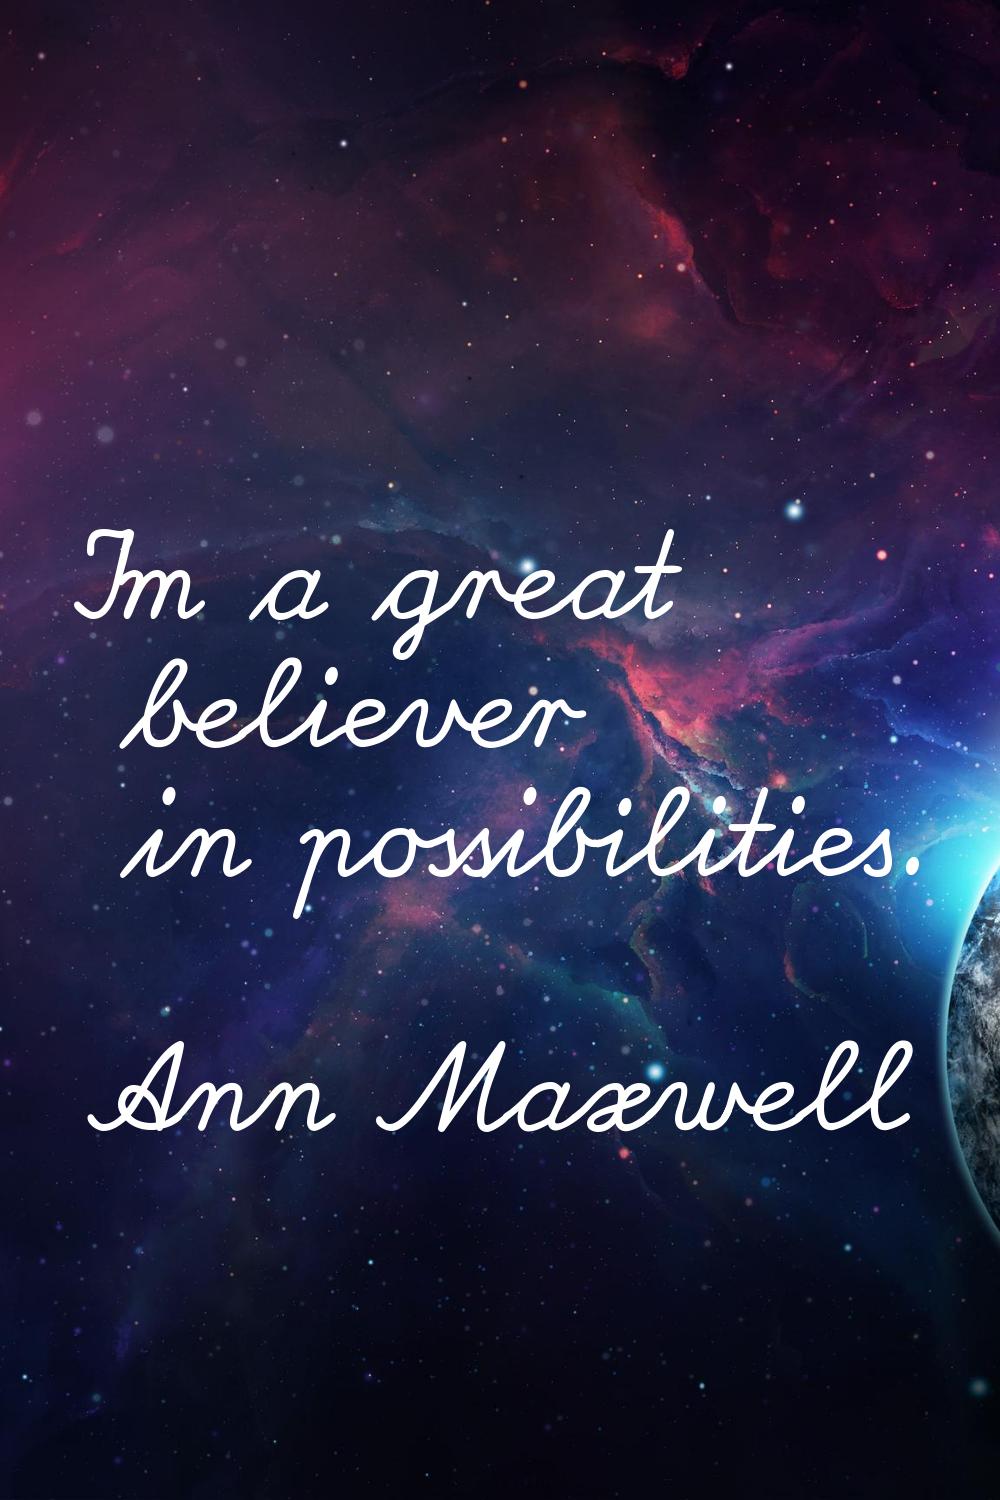 I'm a great believer in possibilities.